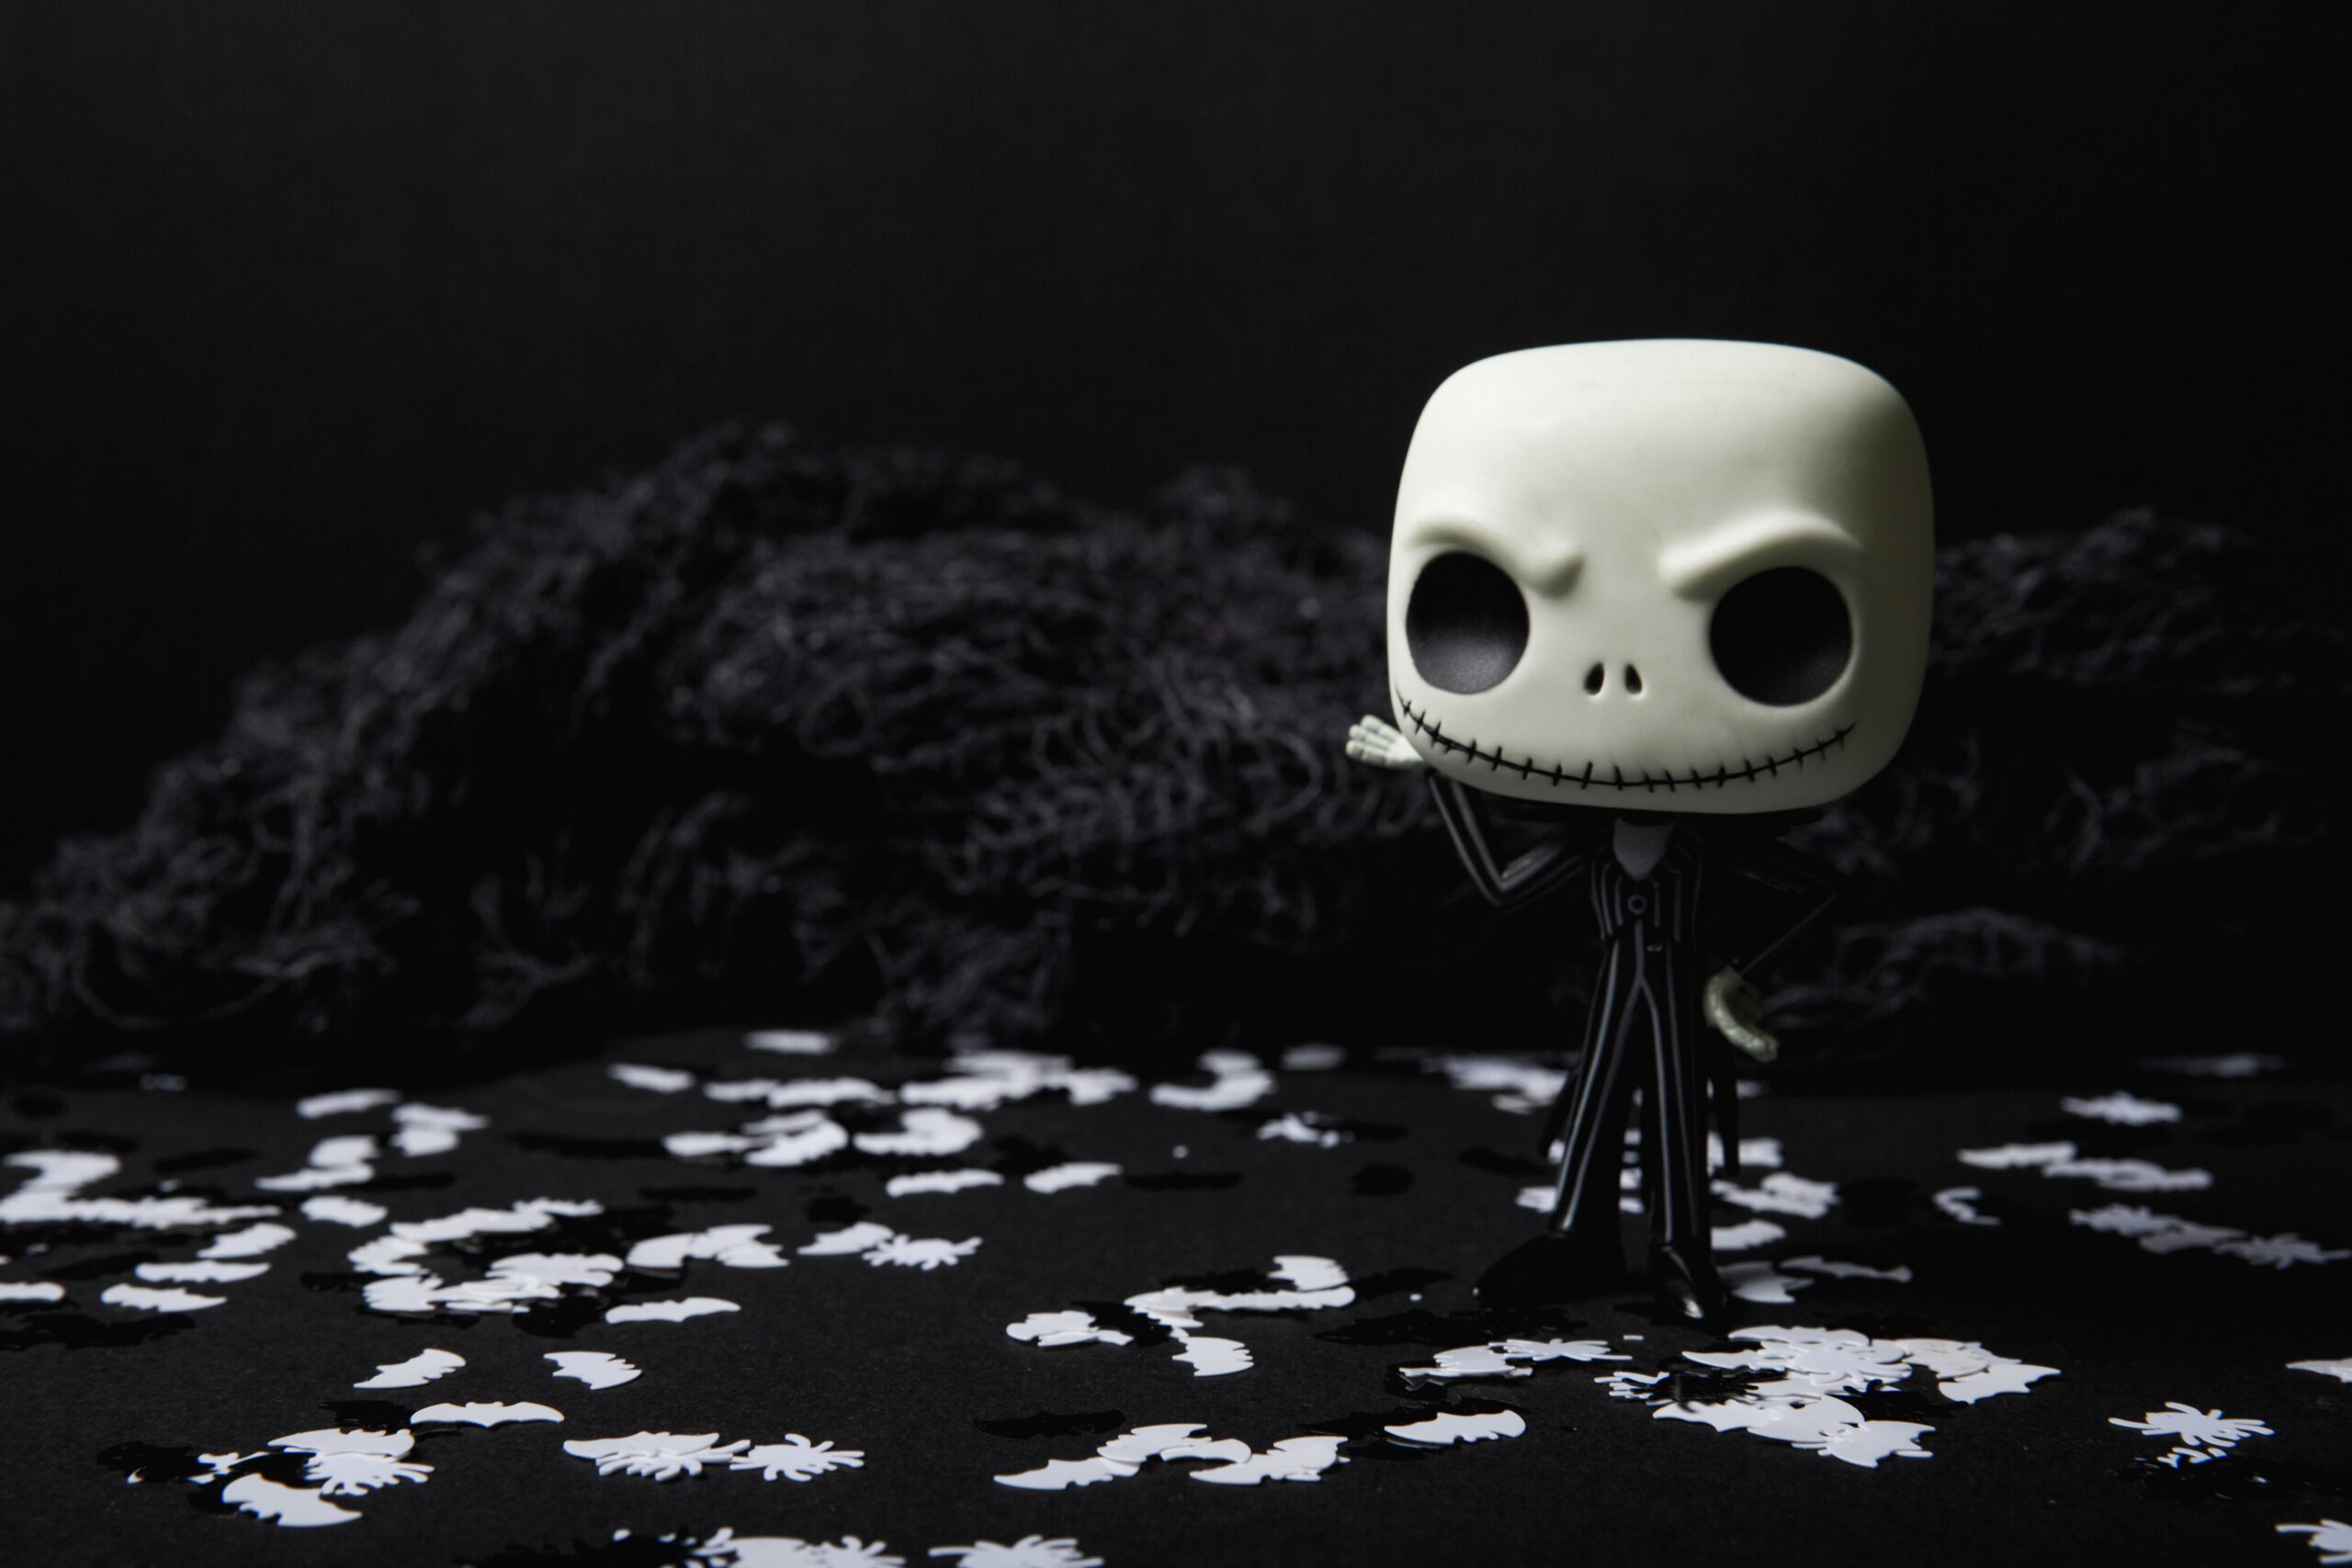 Add your Halloween toy collection to your display shelves for a playful Halloween aesthetic. Pictured: Jack Skellington Pop figure from The Nightmare Before Christmas.